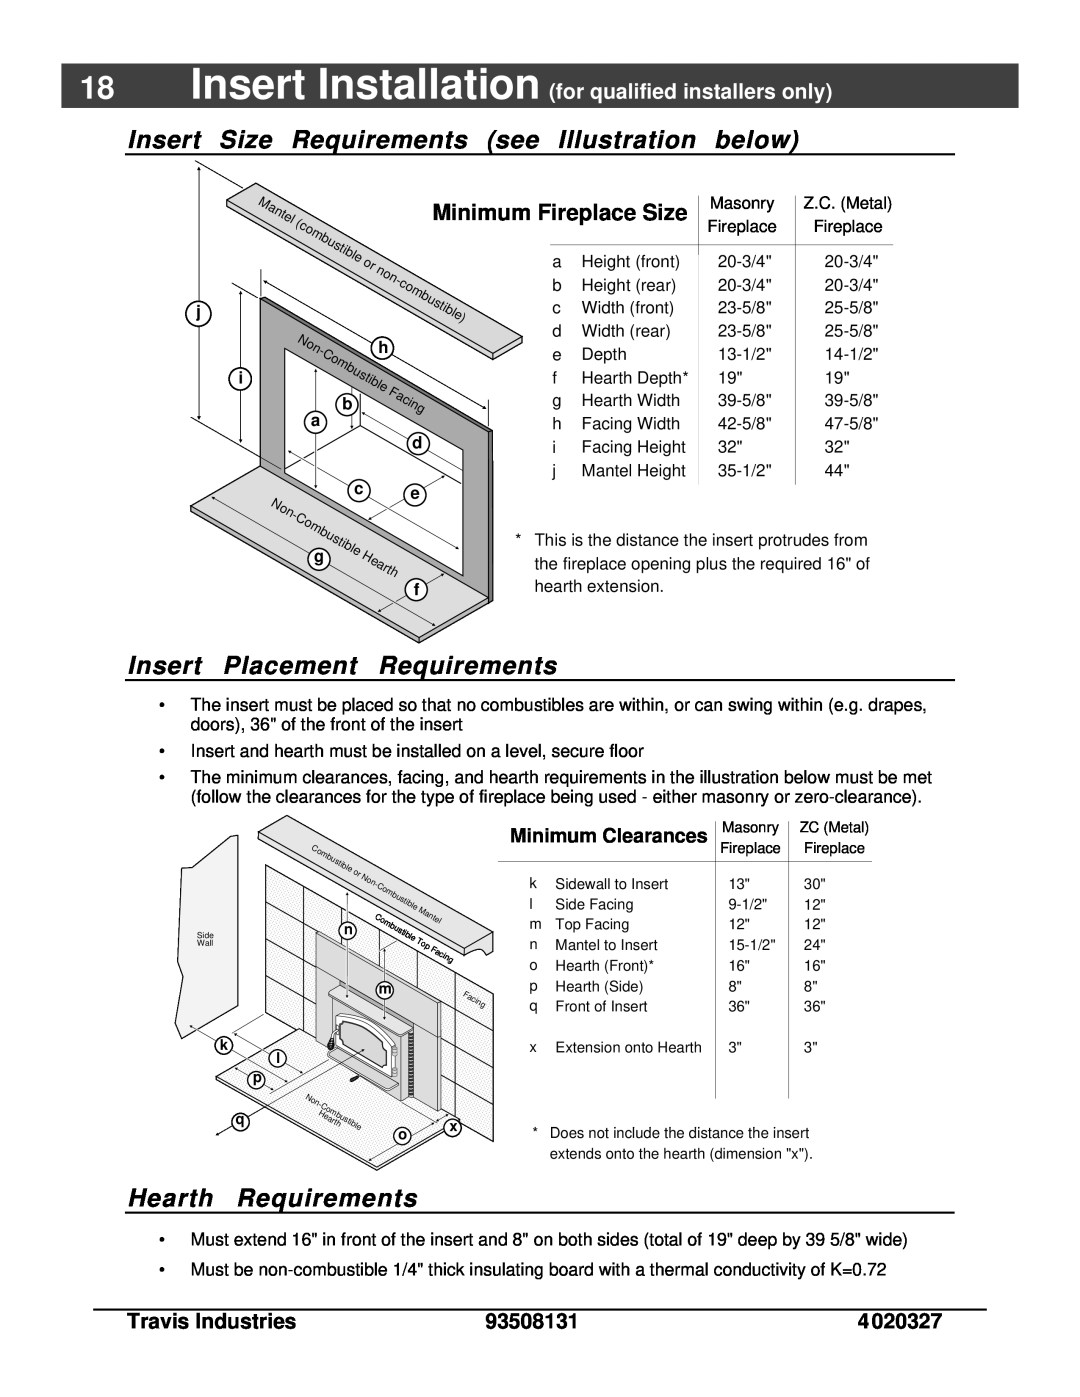 Lopi Answer Wood Stove Insert Size Requirements see Illustration below, Insert Placement Requirements, Hearth Requirements 